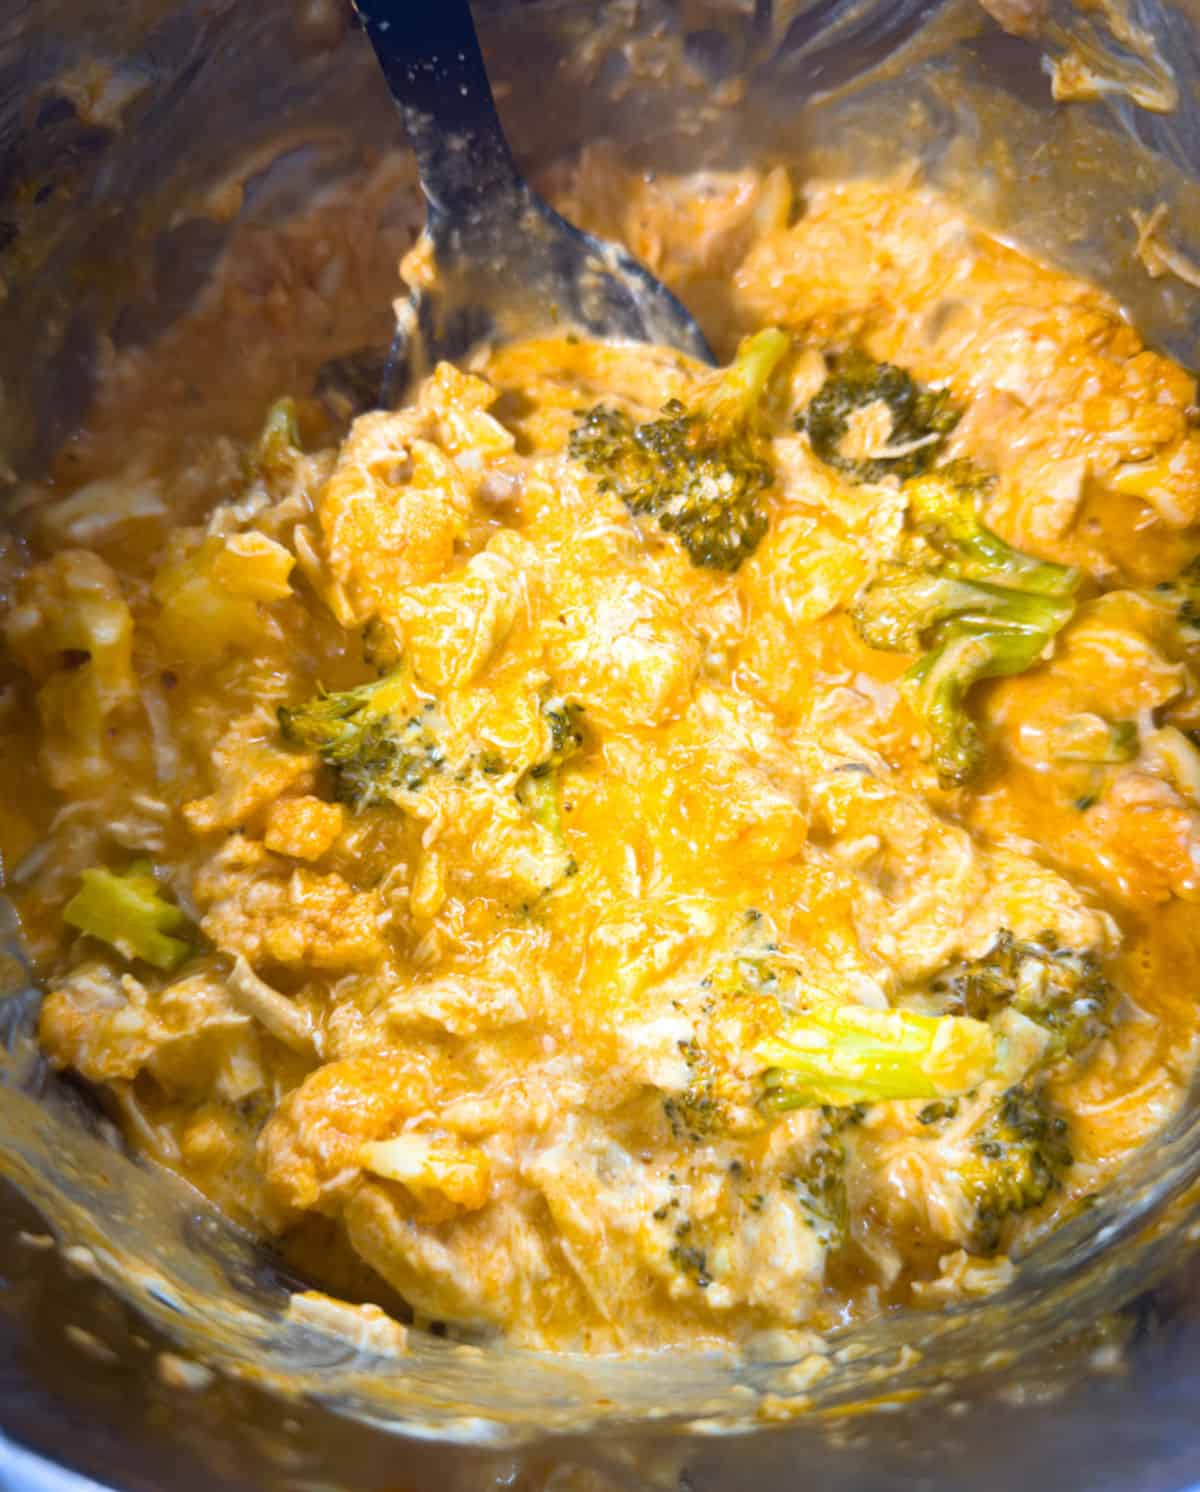 close up of the inside of instant pot silver shiny interior with chicken buffalo broccoli mixed with yogurt and cheese for a creamy finish